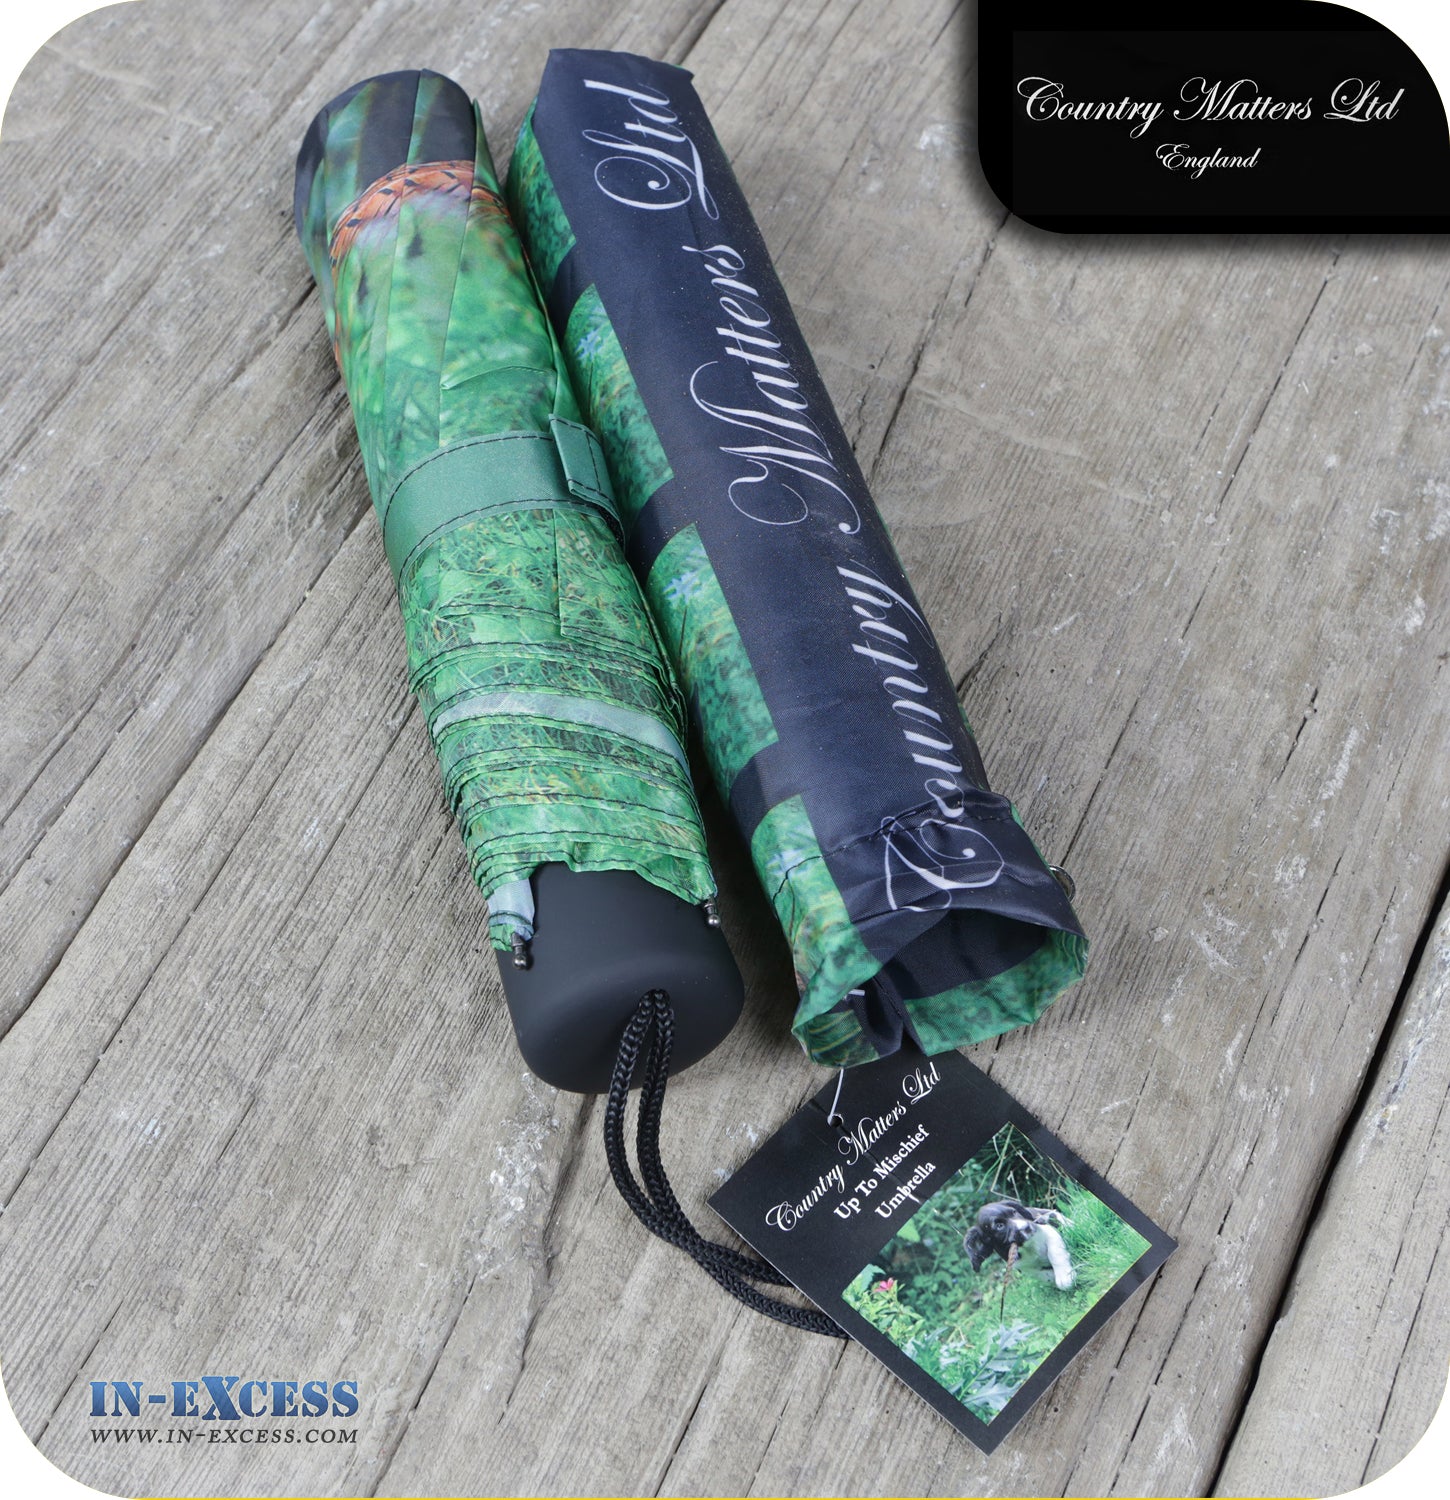 Country Matters Telescopic and Folding Umbrella - 'Up to Mischief'